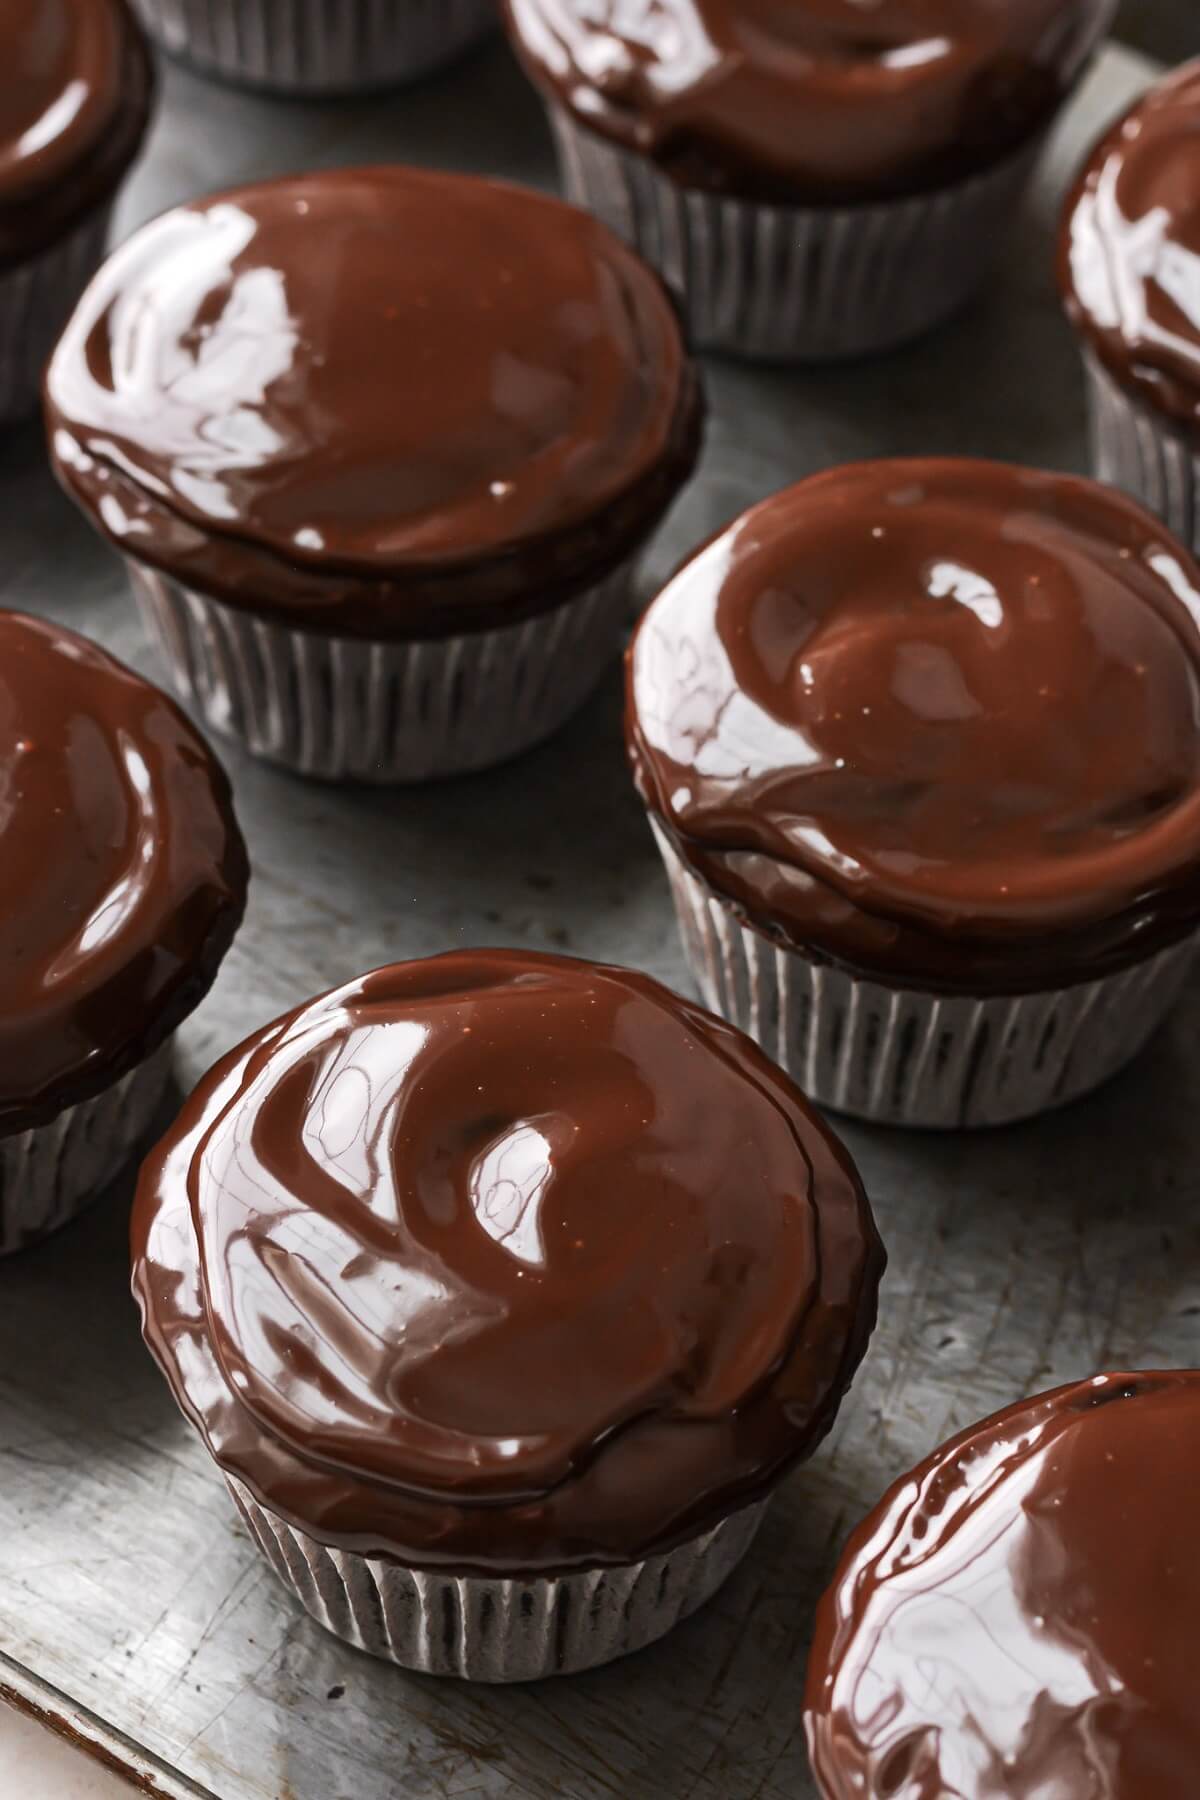 Chocolate cupcakes dipped in ganache.